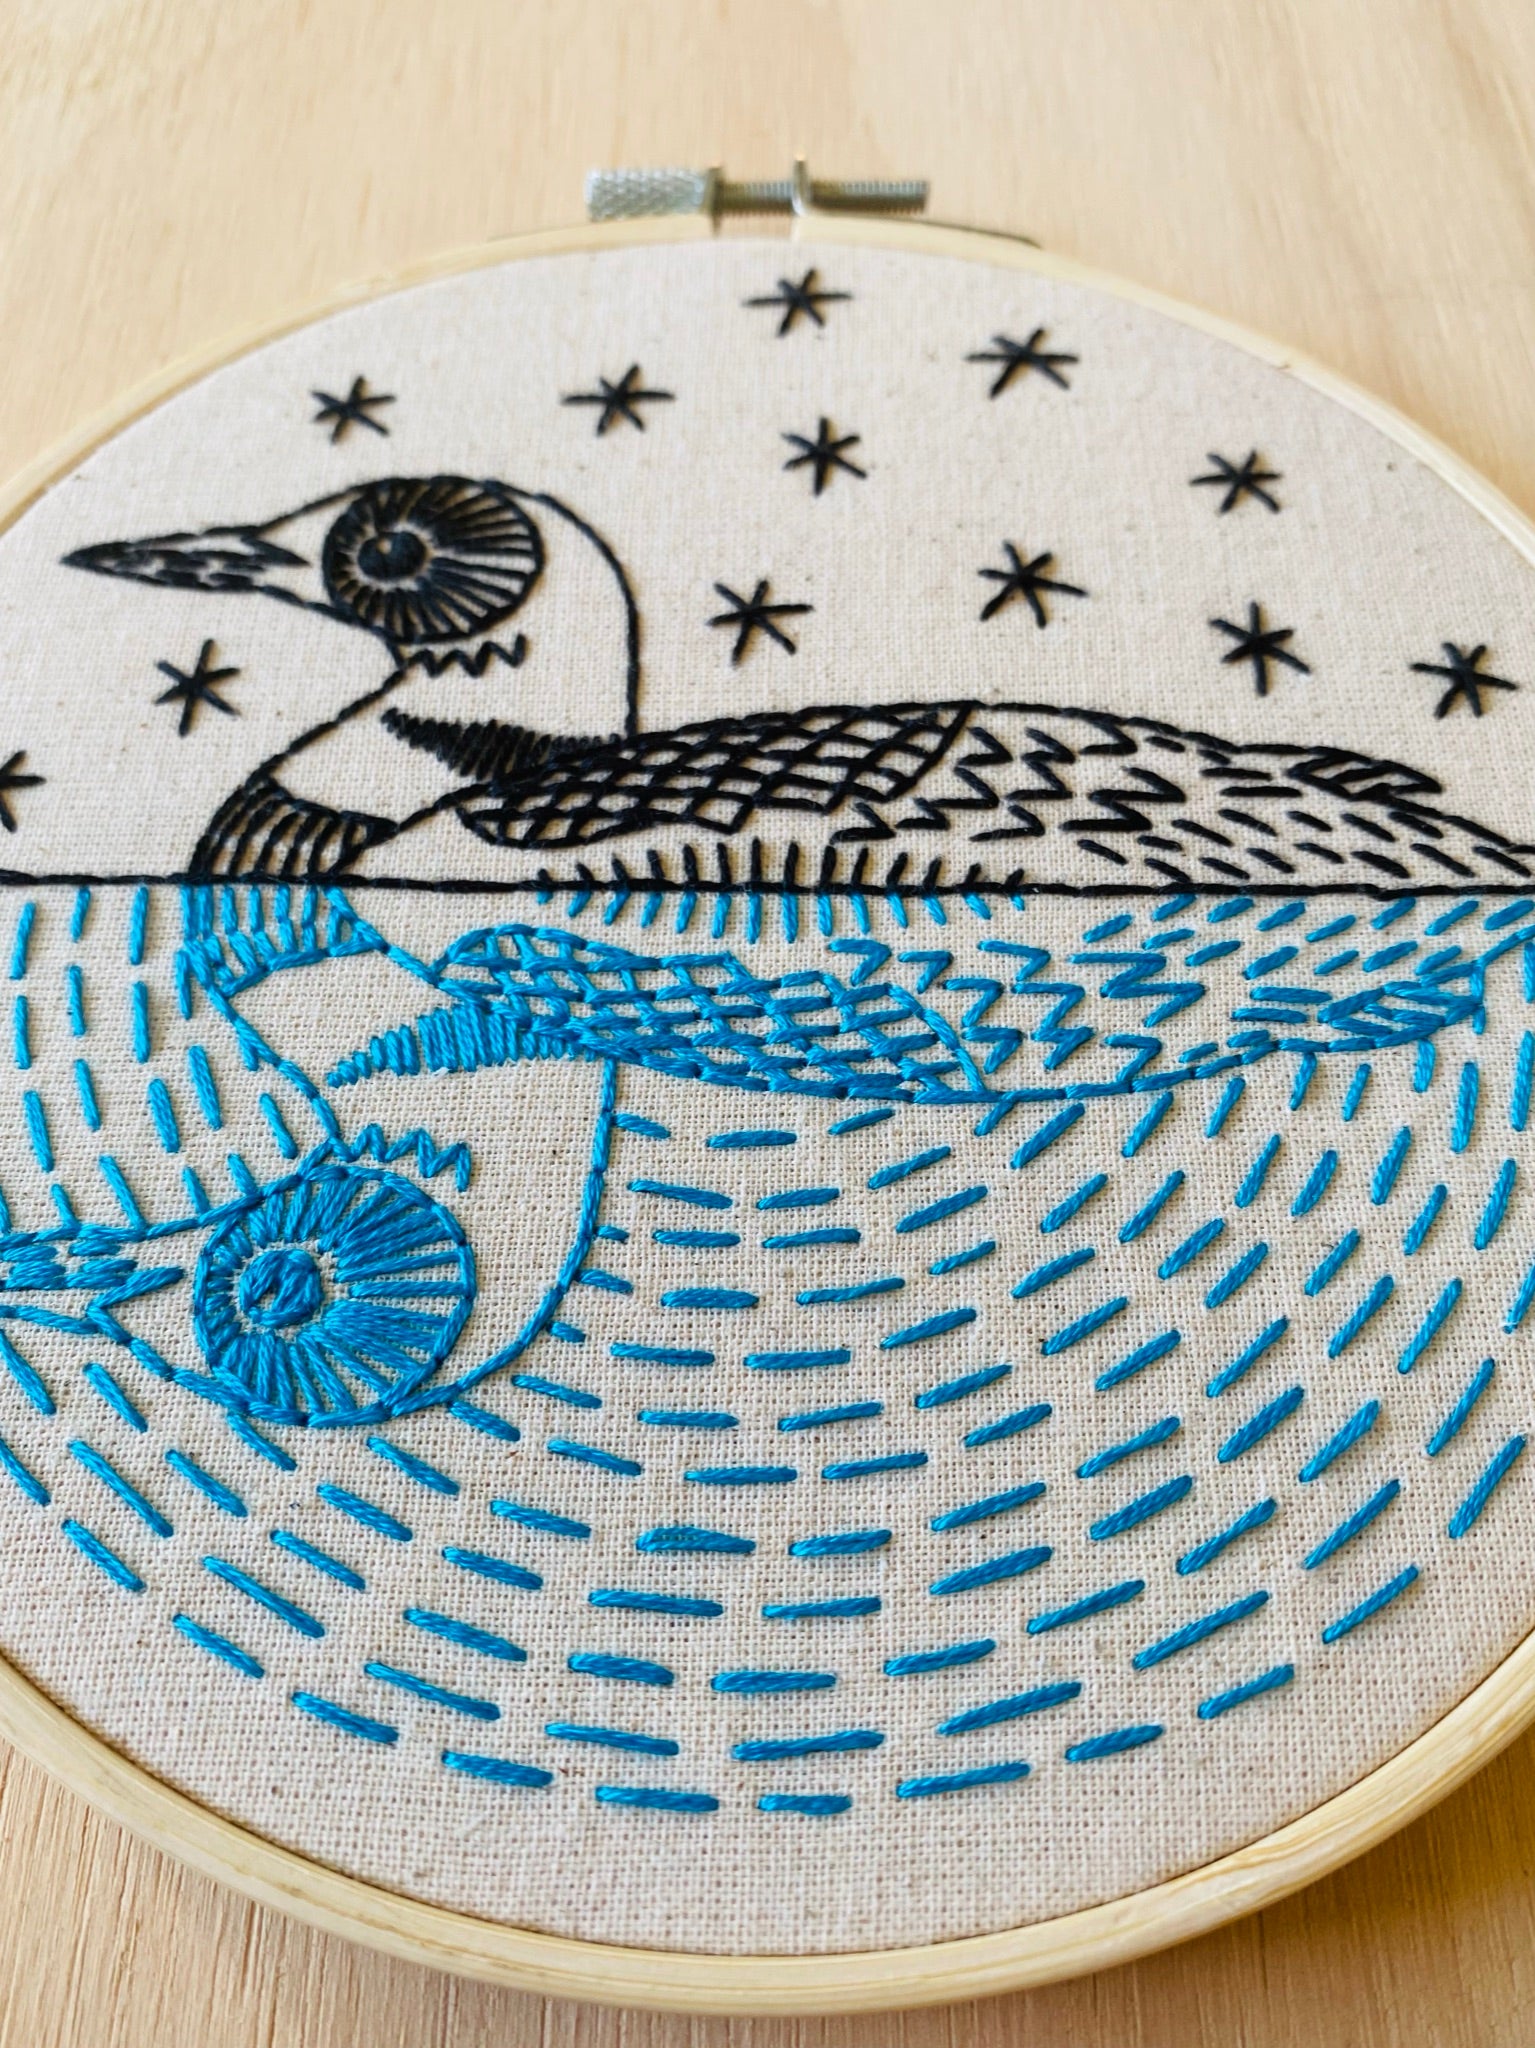 Embroidery For Beginners • Stitching A Kit • Tracing Patterns